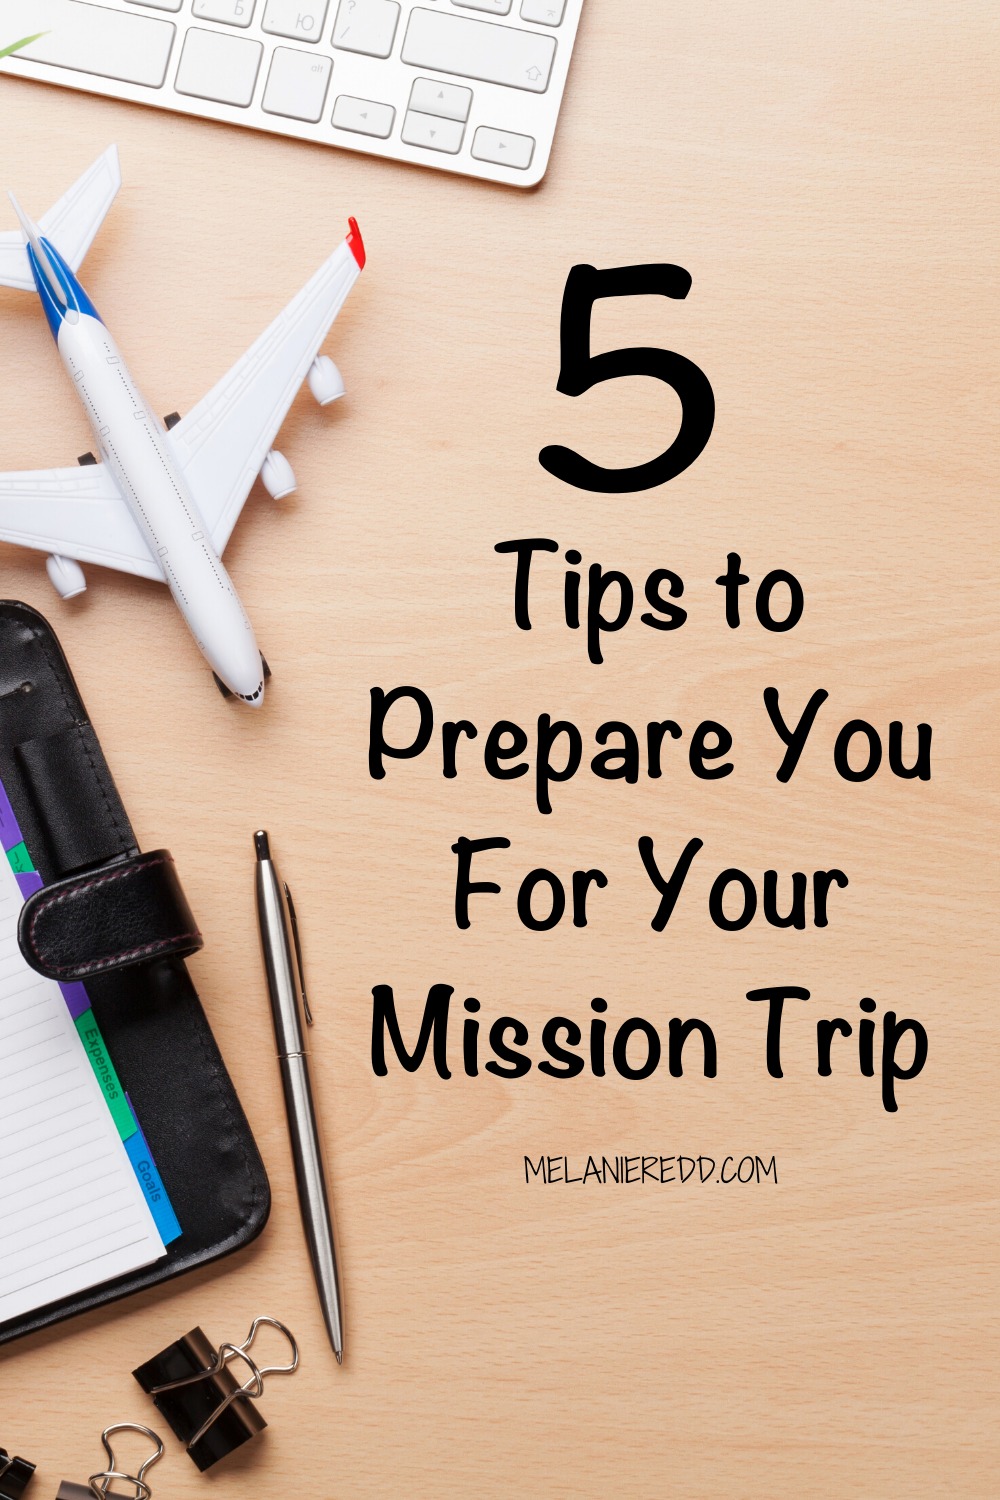 Going on a mission trip to help others is one of the most rewarding things in the world. Here are 5 tips to prepare you for your mission trip.